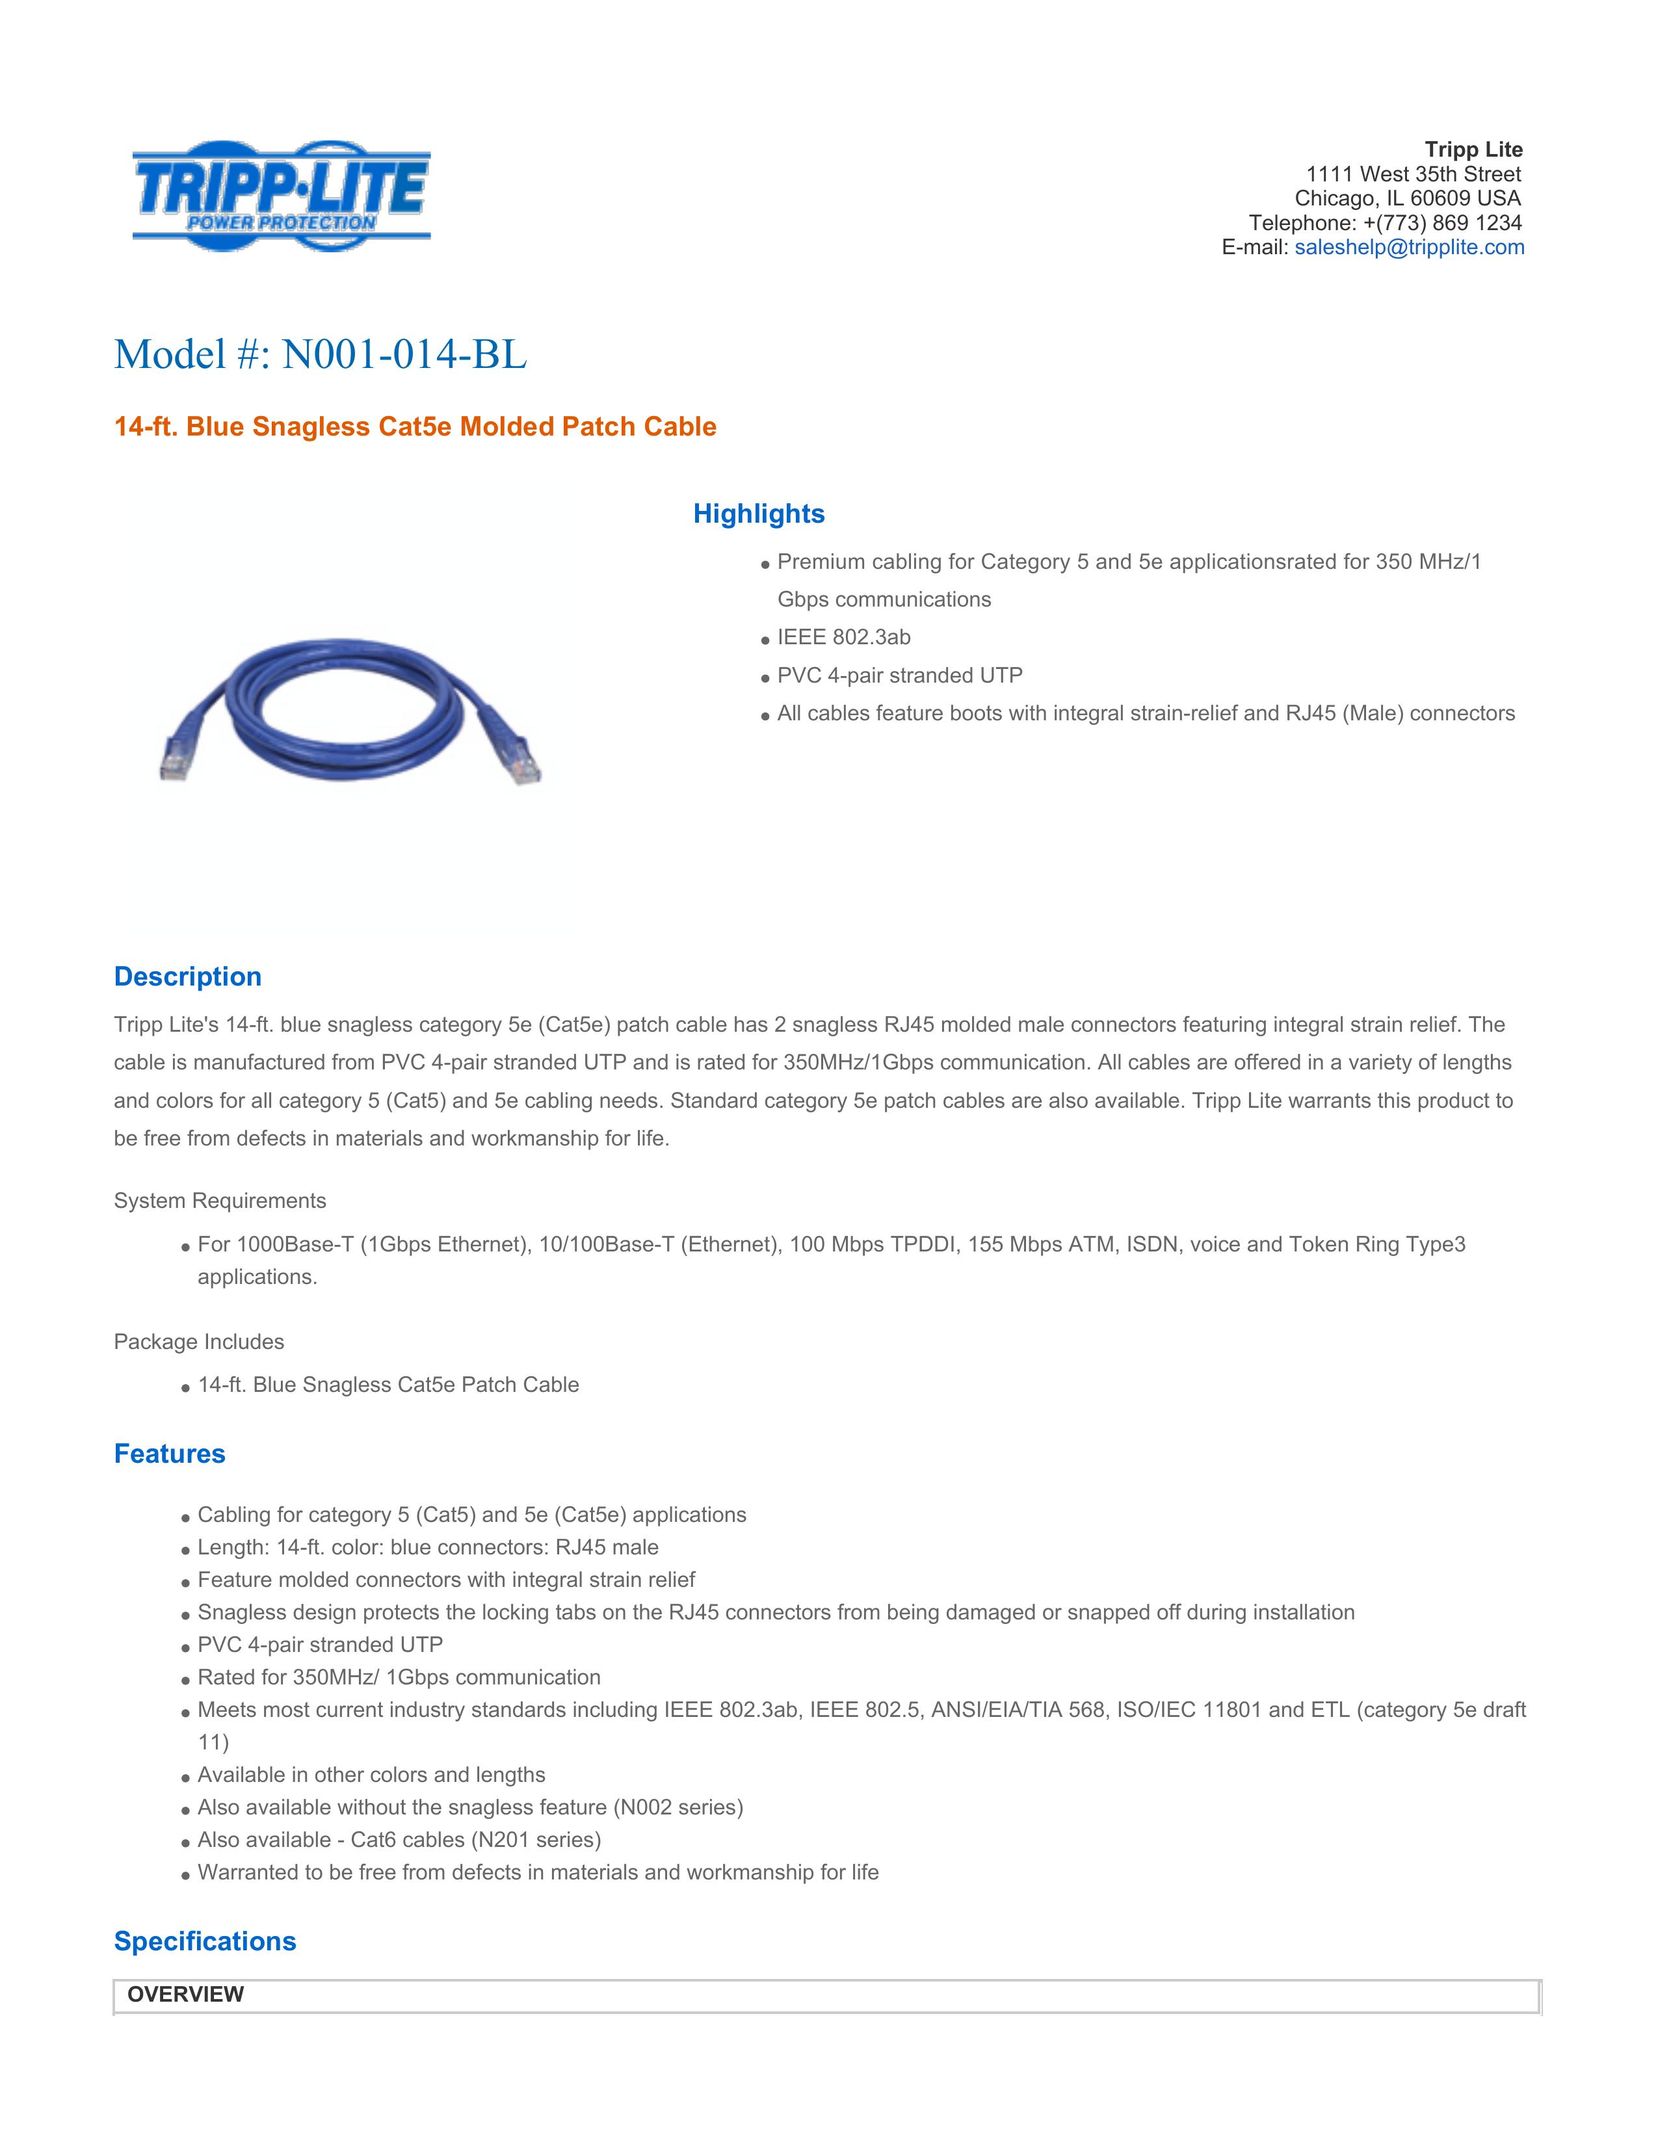 Tripp Lite N001-014-BL Network Cables User Manual